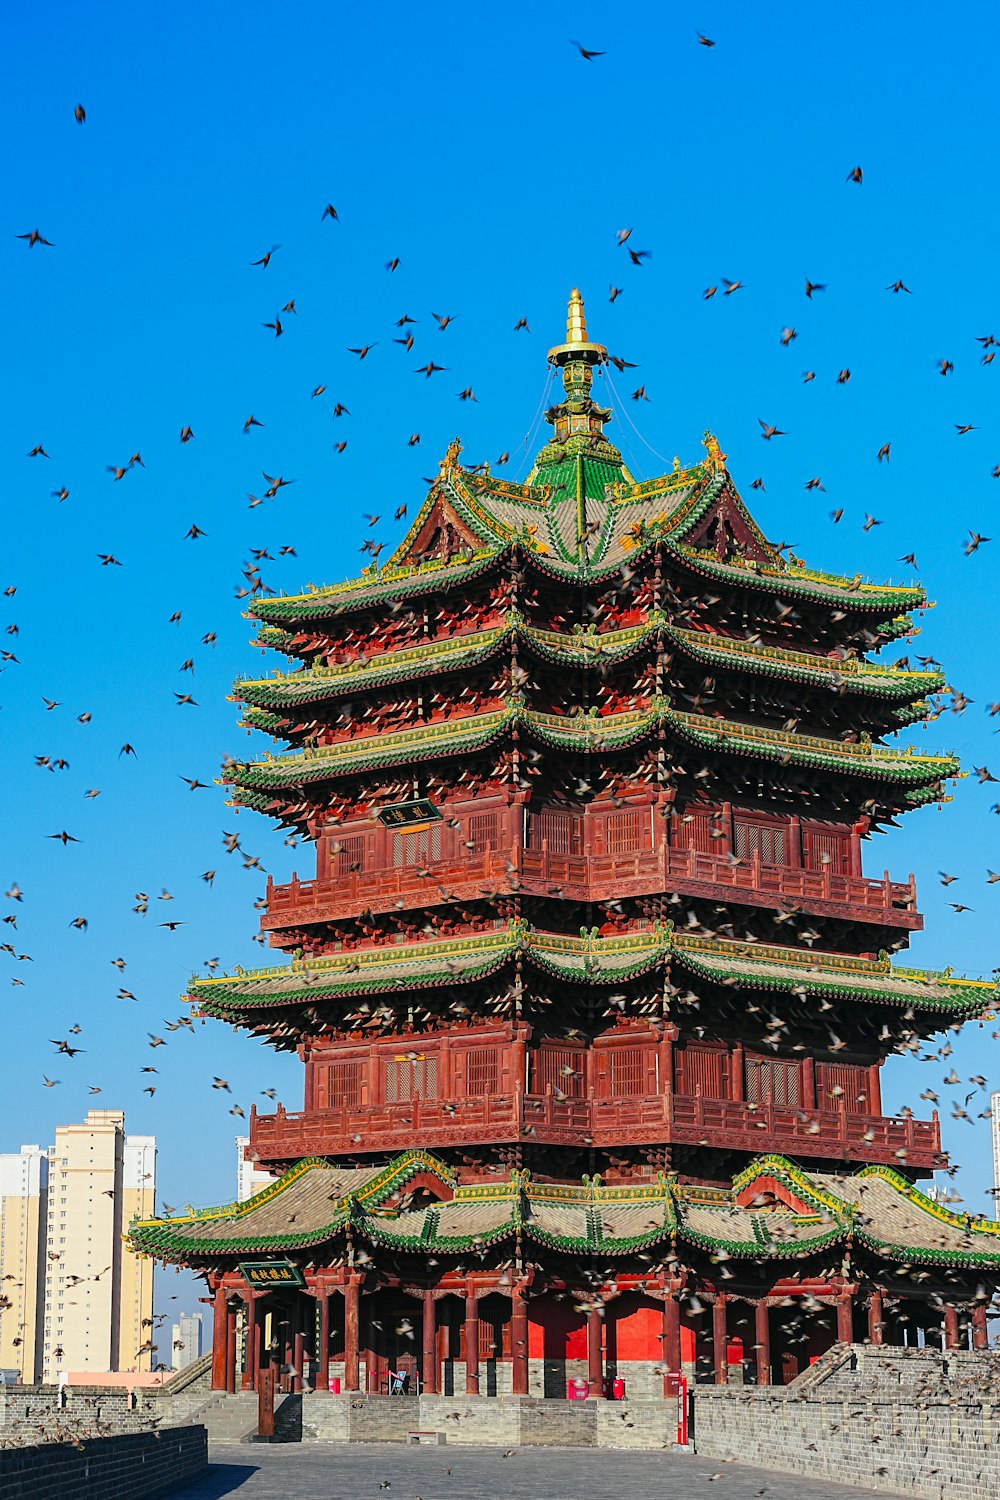 a large tower with birds flying around it